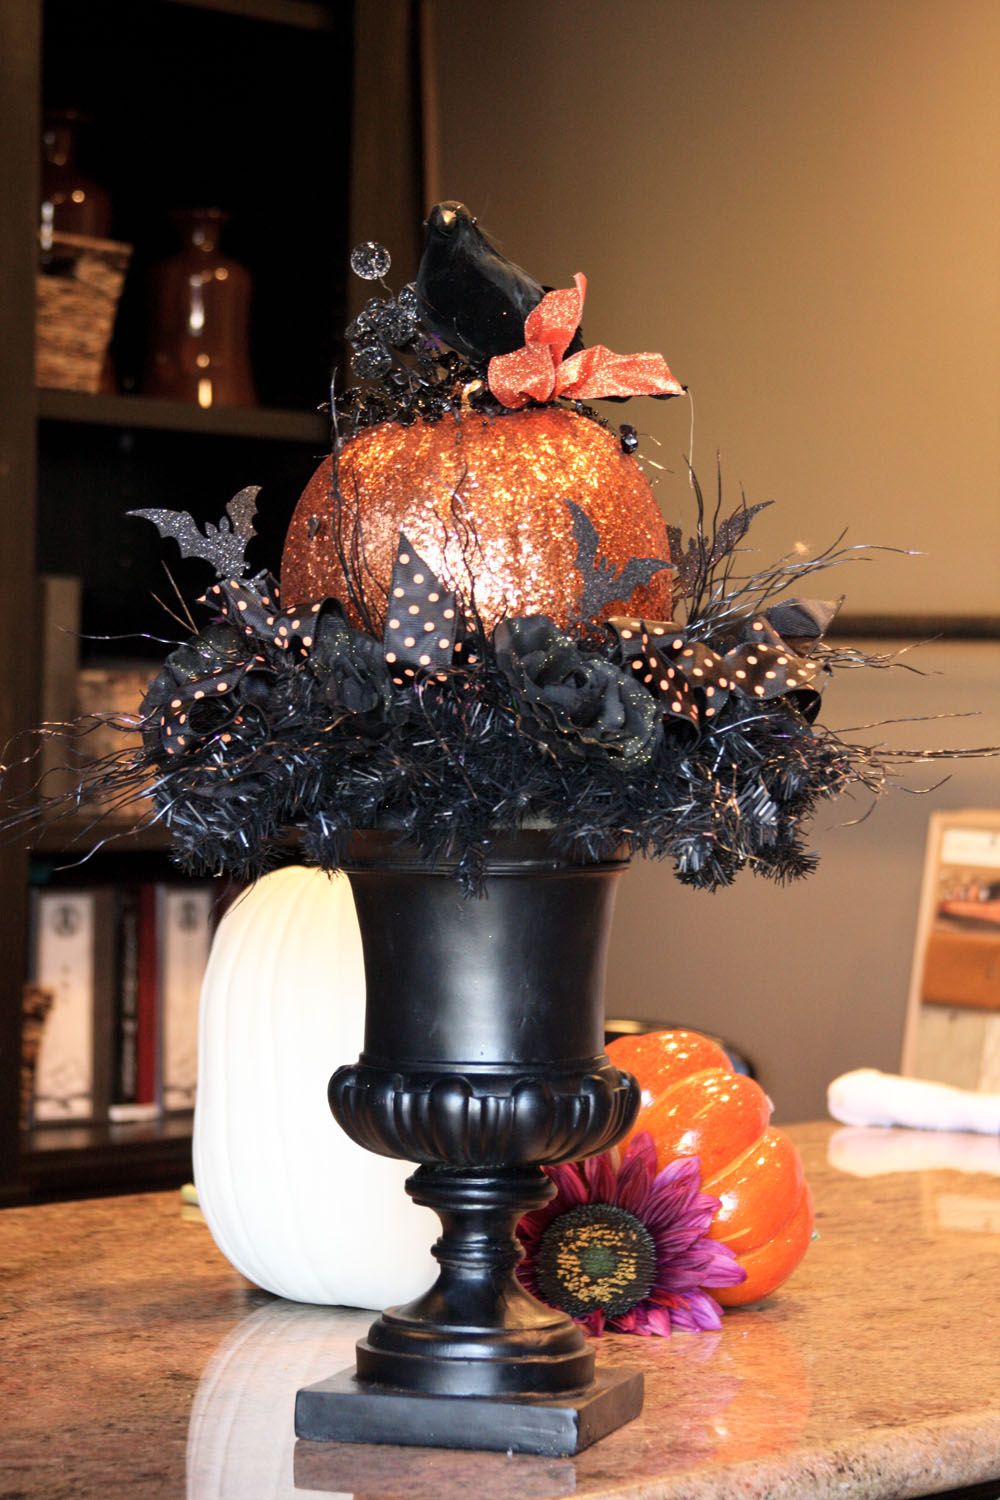 Add pumpkin and crow You will get a sophisticated Halloween centerpiece.